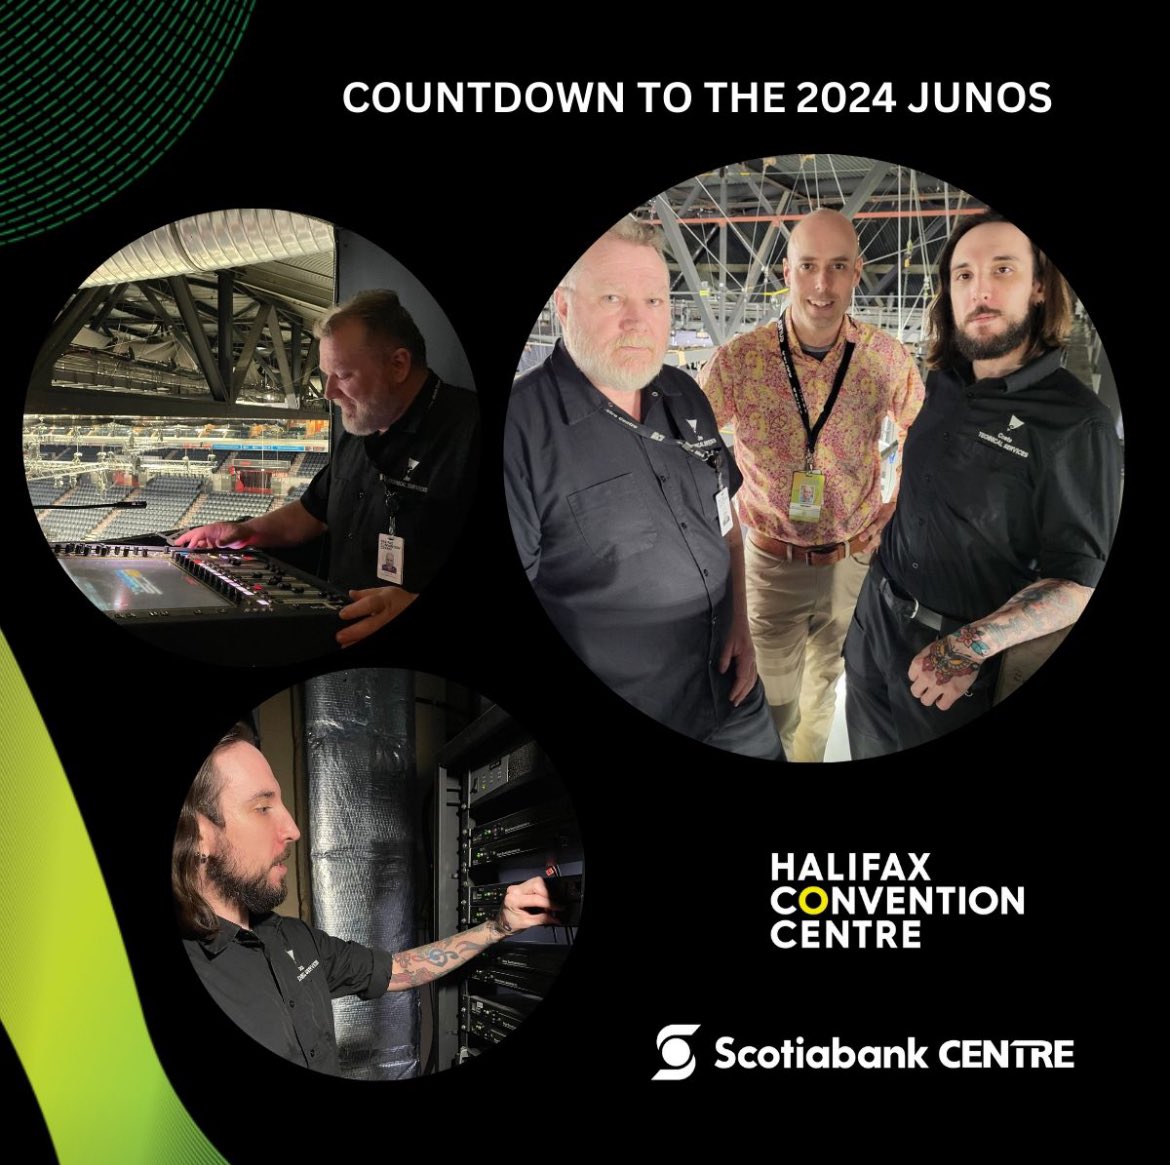 It’s JUNO Week! Can you feel the power? Our Tech Services team can! Ken, Costa and Jim support electrical distribution, sound EQ & systems alignment @ScotiabankCtr and work with Encore @hfxconventions on end-to-end AV. They are AMPED for both JUNO award shows at our venues!